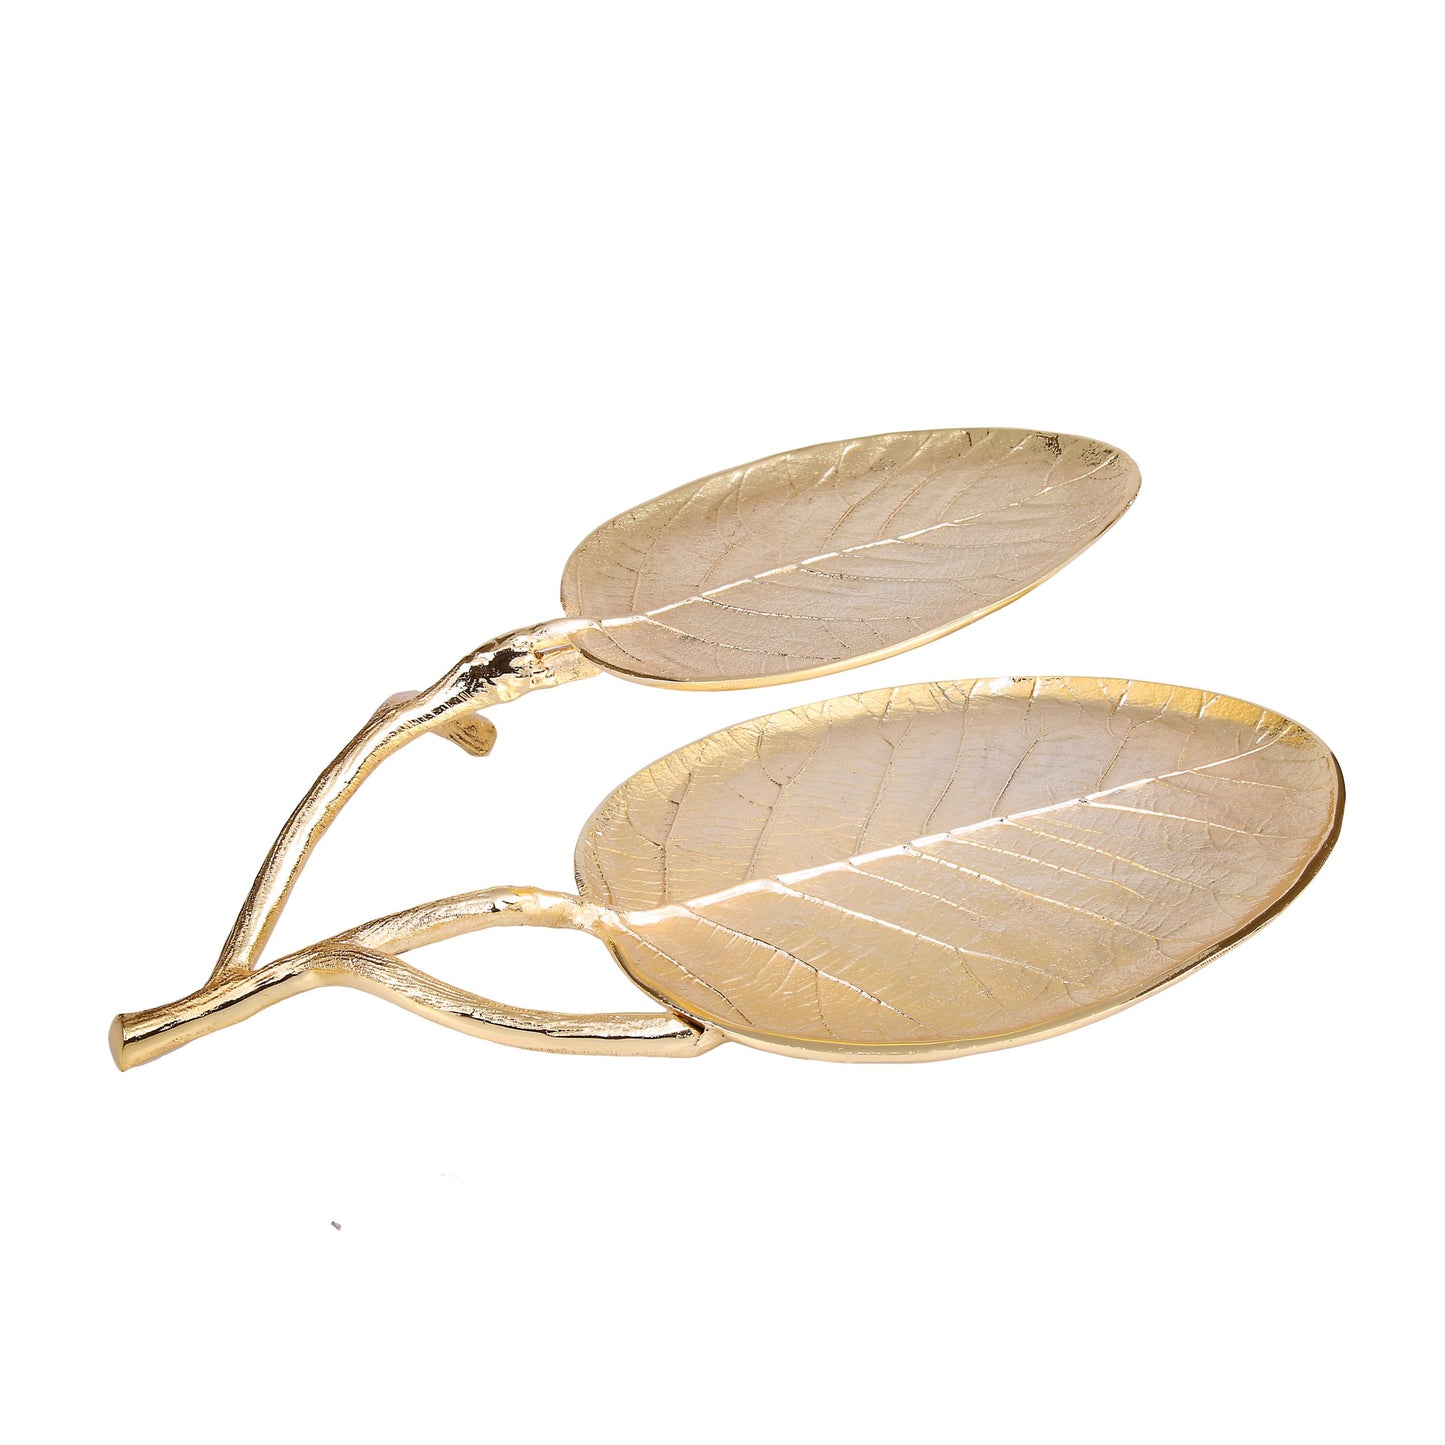 Classic Touch Decor Leaf 2 Bowl Relish Dish, Stainless Steel, 14.5"